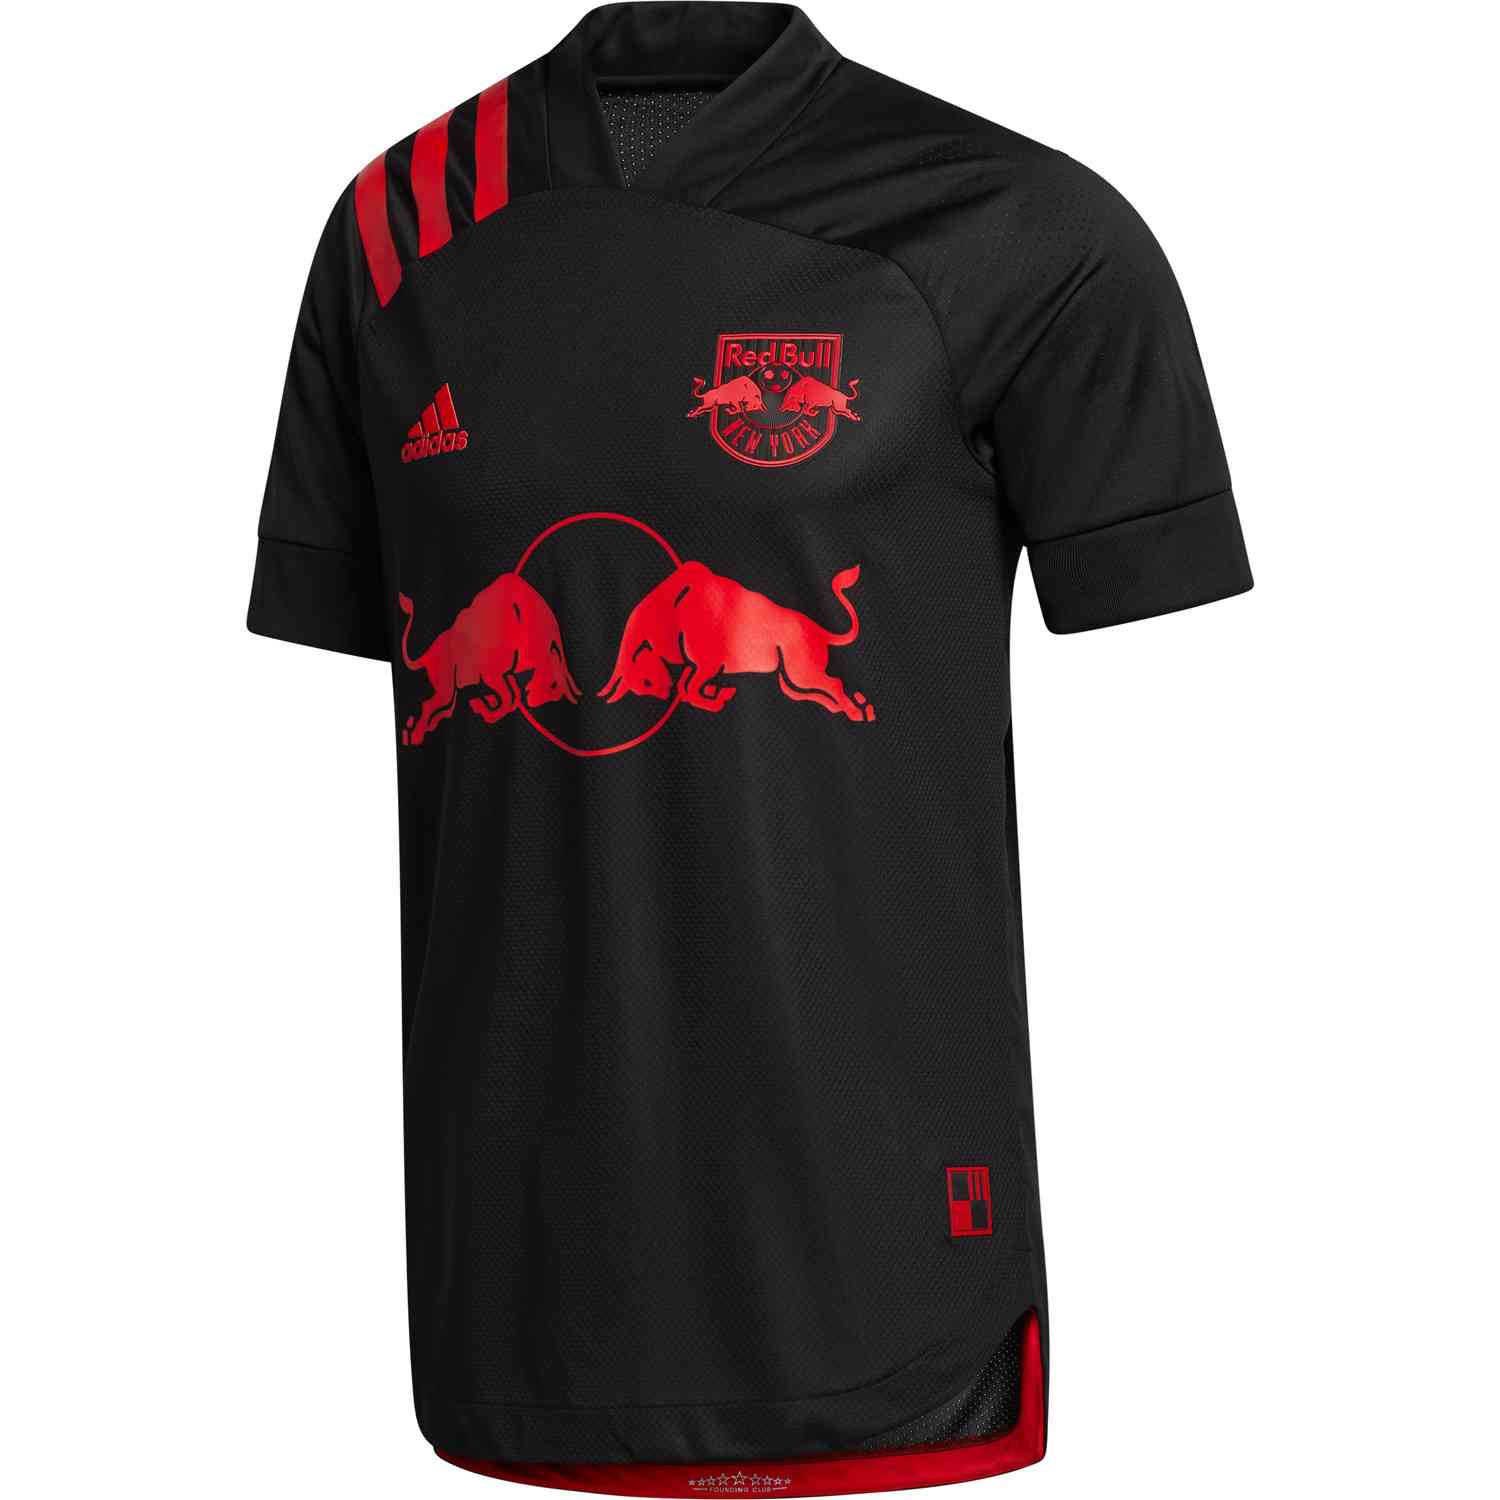 adidas red jersey